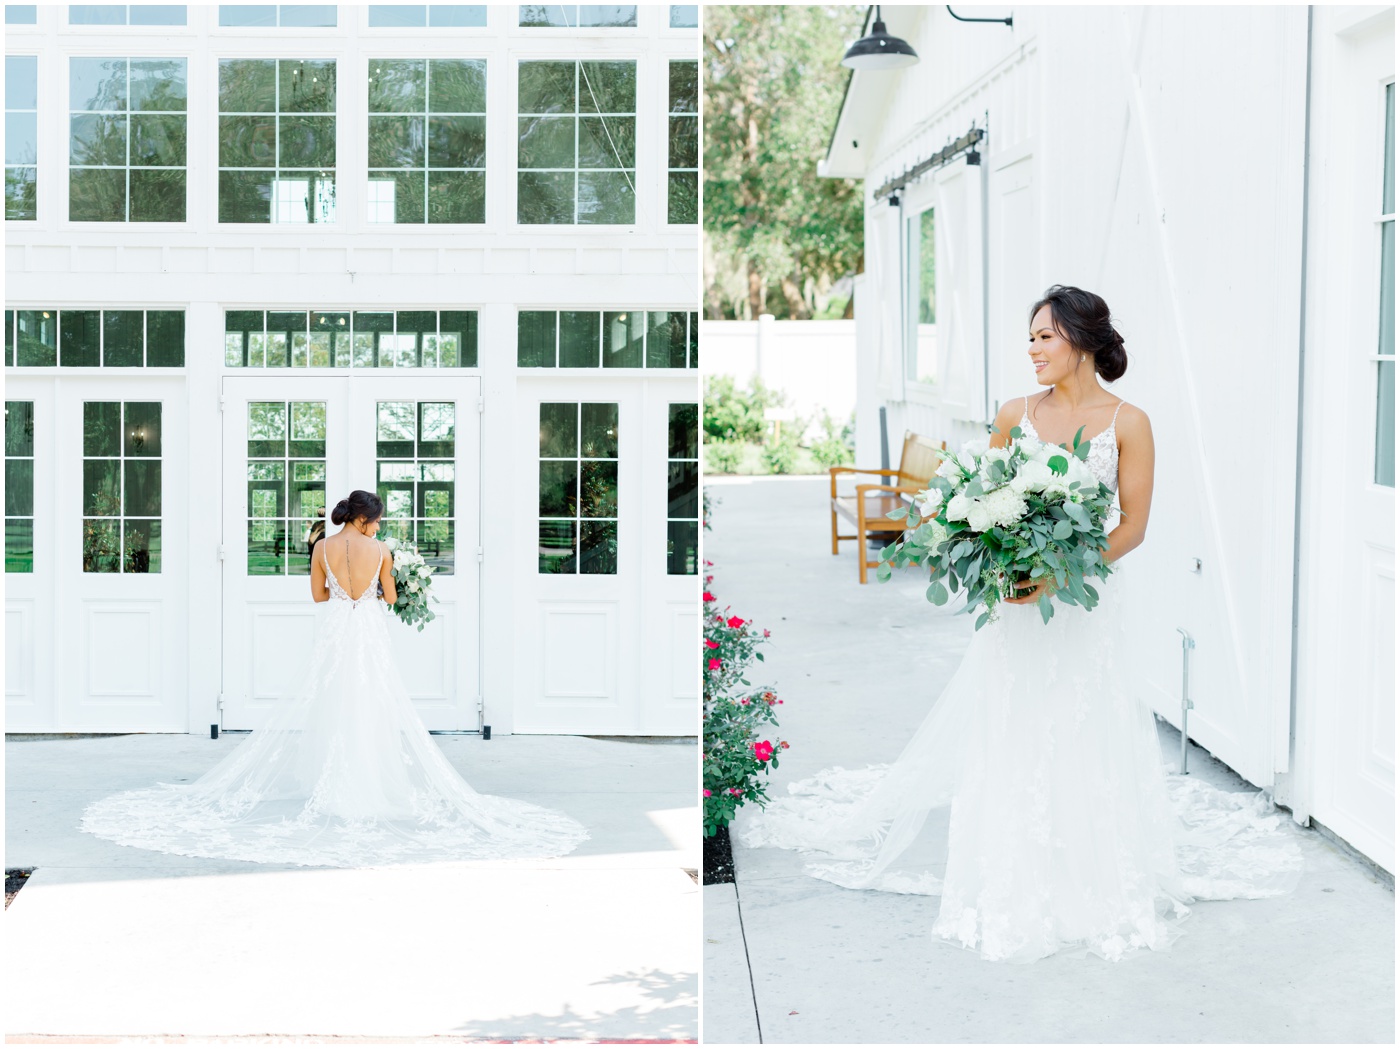 wedding photographer in Houston captures a bride smiling with her bouquet